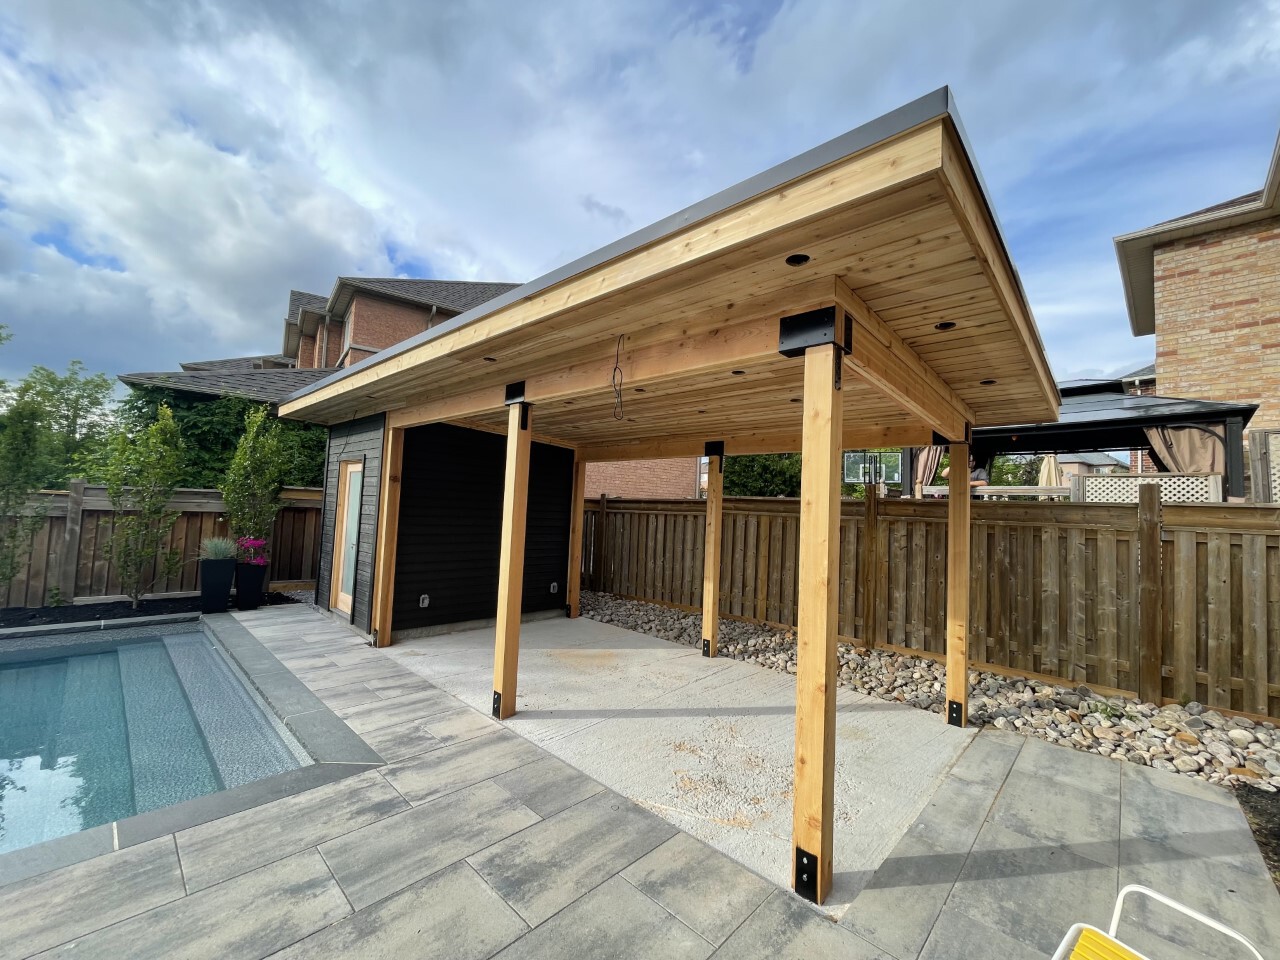 Front view of 10’ x 25' Sanara Pool Cabana located in Aurora, Ontario – Summerwood Products